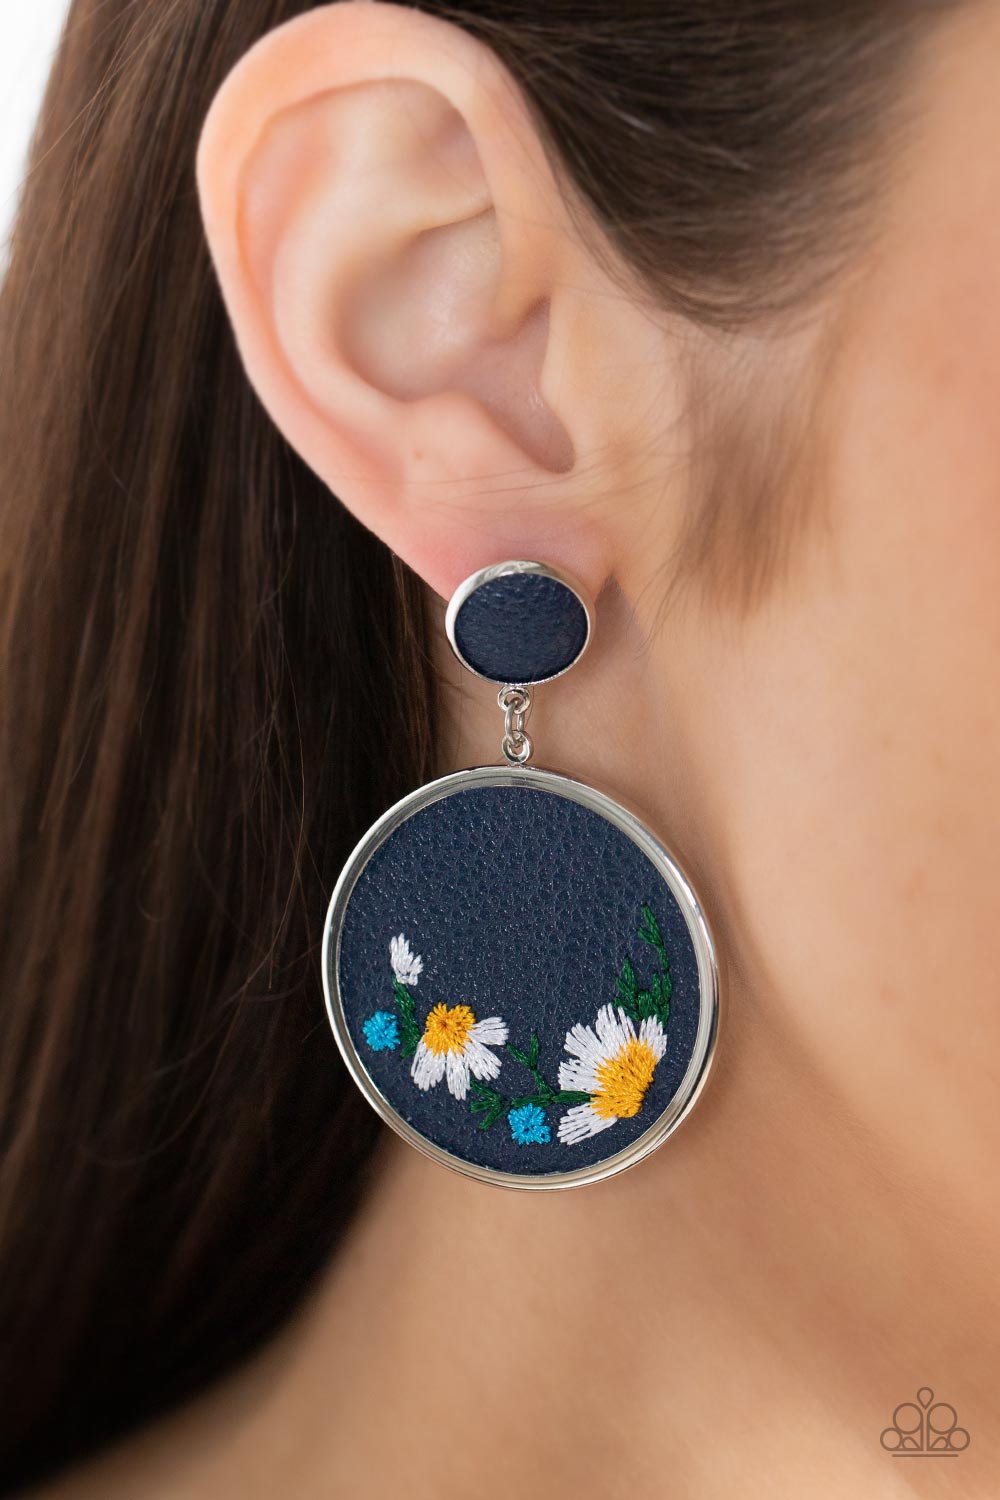 Embroidered Gardens Blue Post Earring - Paparazzi Accessories  A small Rhodonite leather disc, encased in a simple silver frame, anchors a larger Rhodonite circle that is adorned with fanciful embroidered flowers creating a whimsical lure. Earring attaches to a standard post fitting.  Sold as one pair of post earrings.